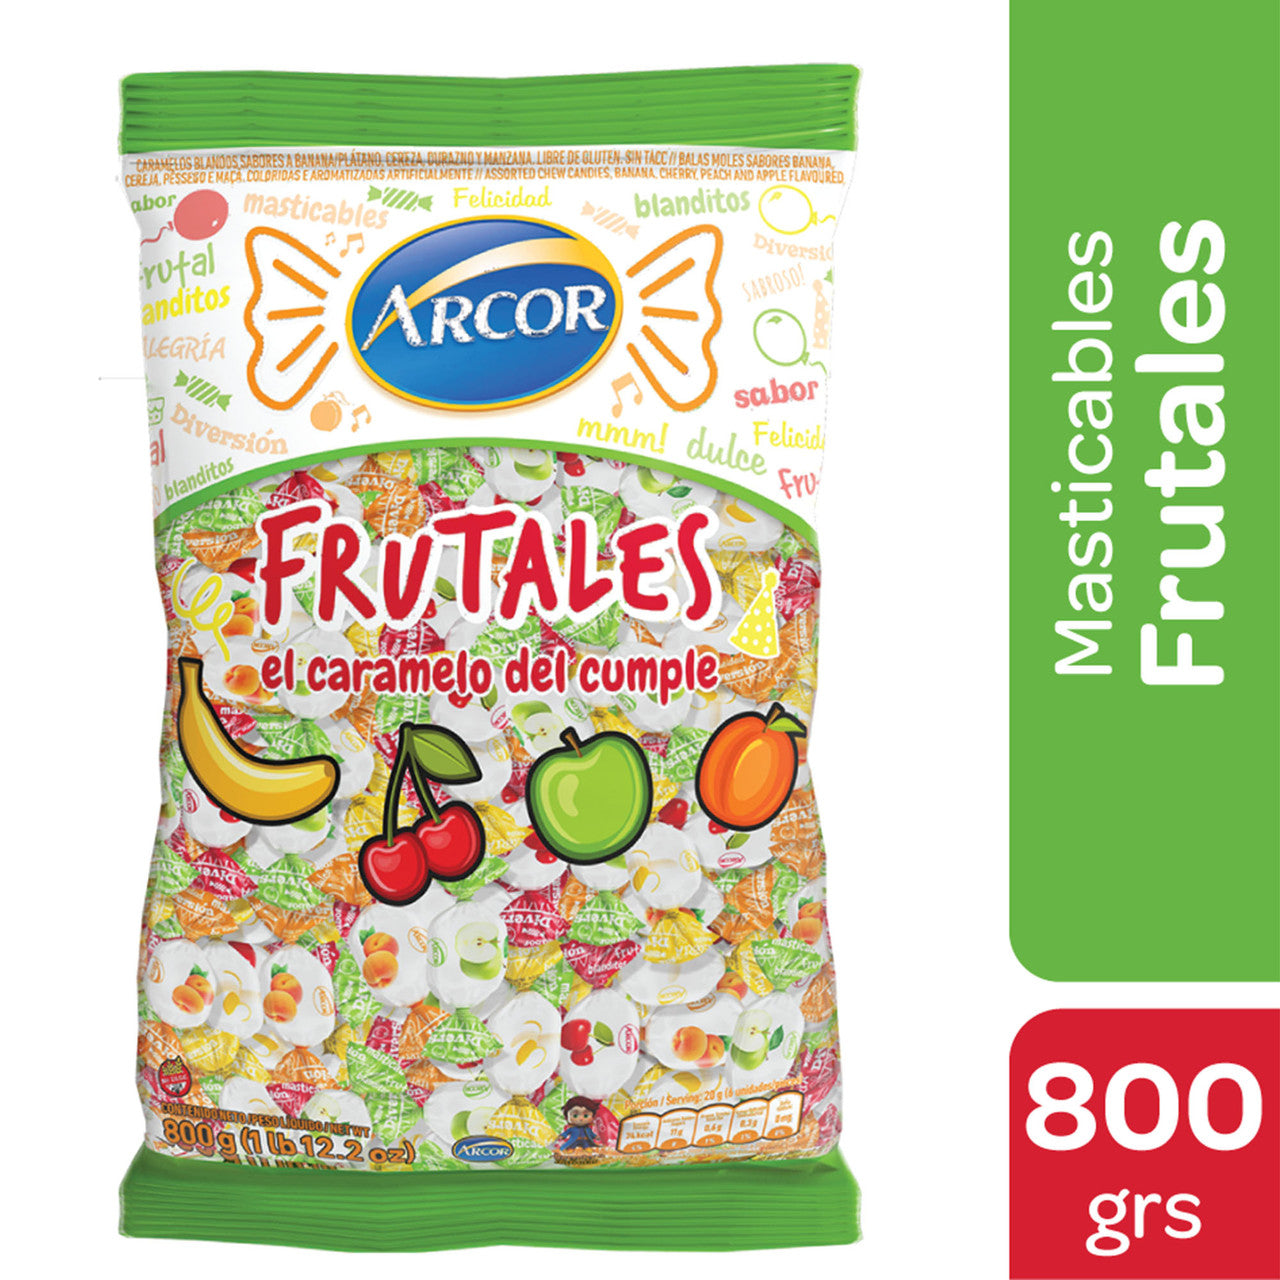 Caramelos Frutales Masticables / Soft Chewy Candies Assorted Fruit Flavors ARCOR (800 g - 28.21 oz)